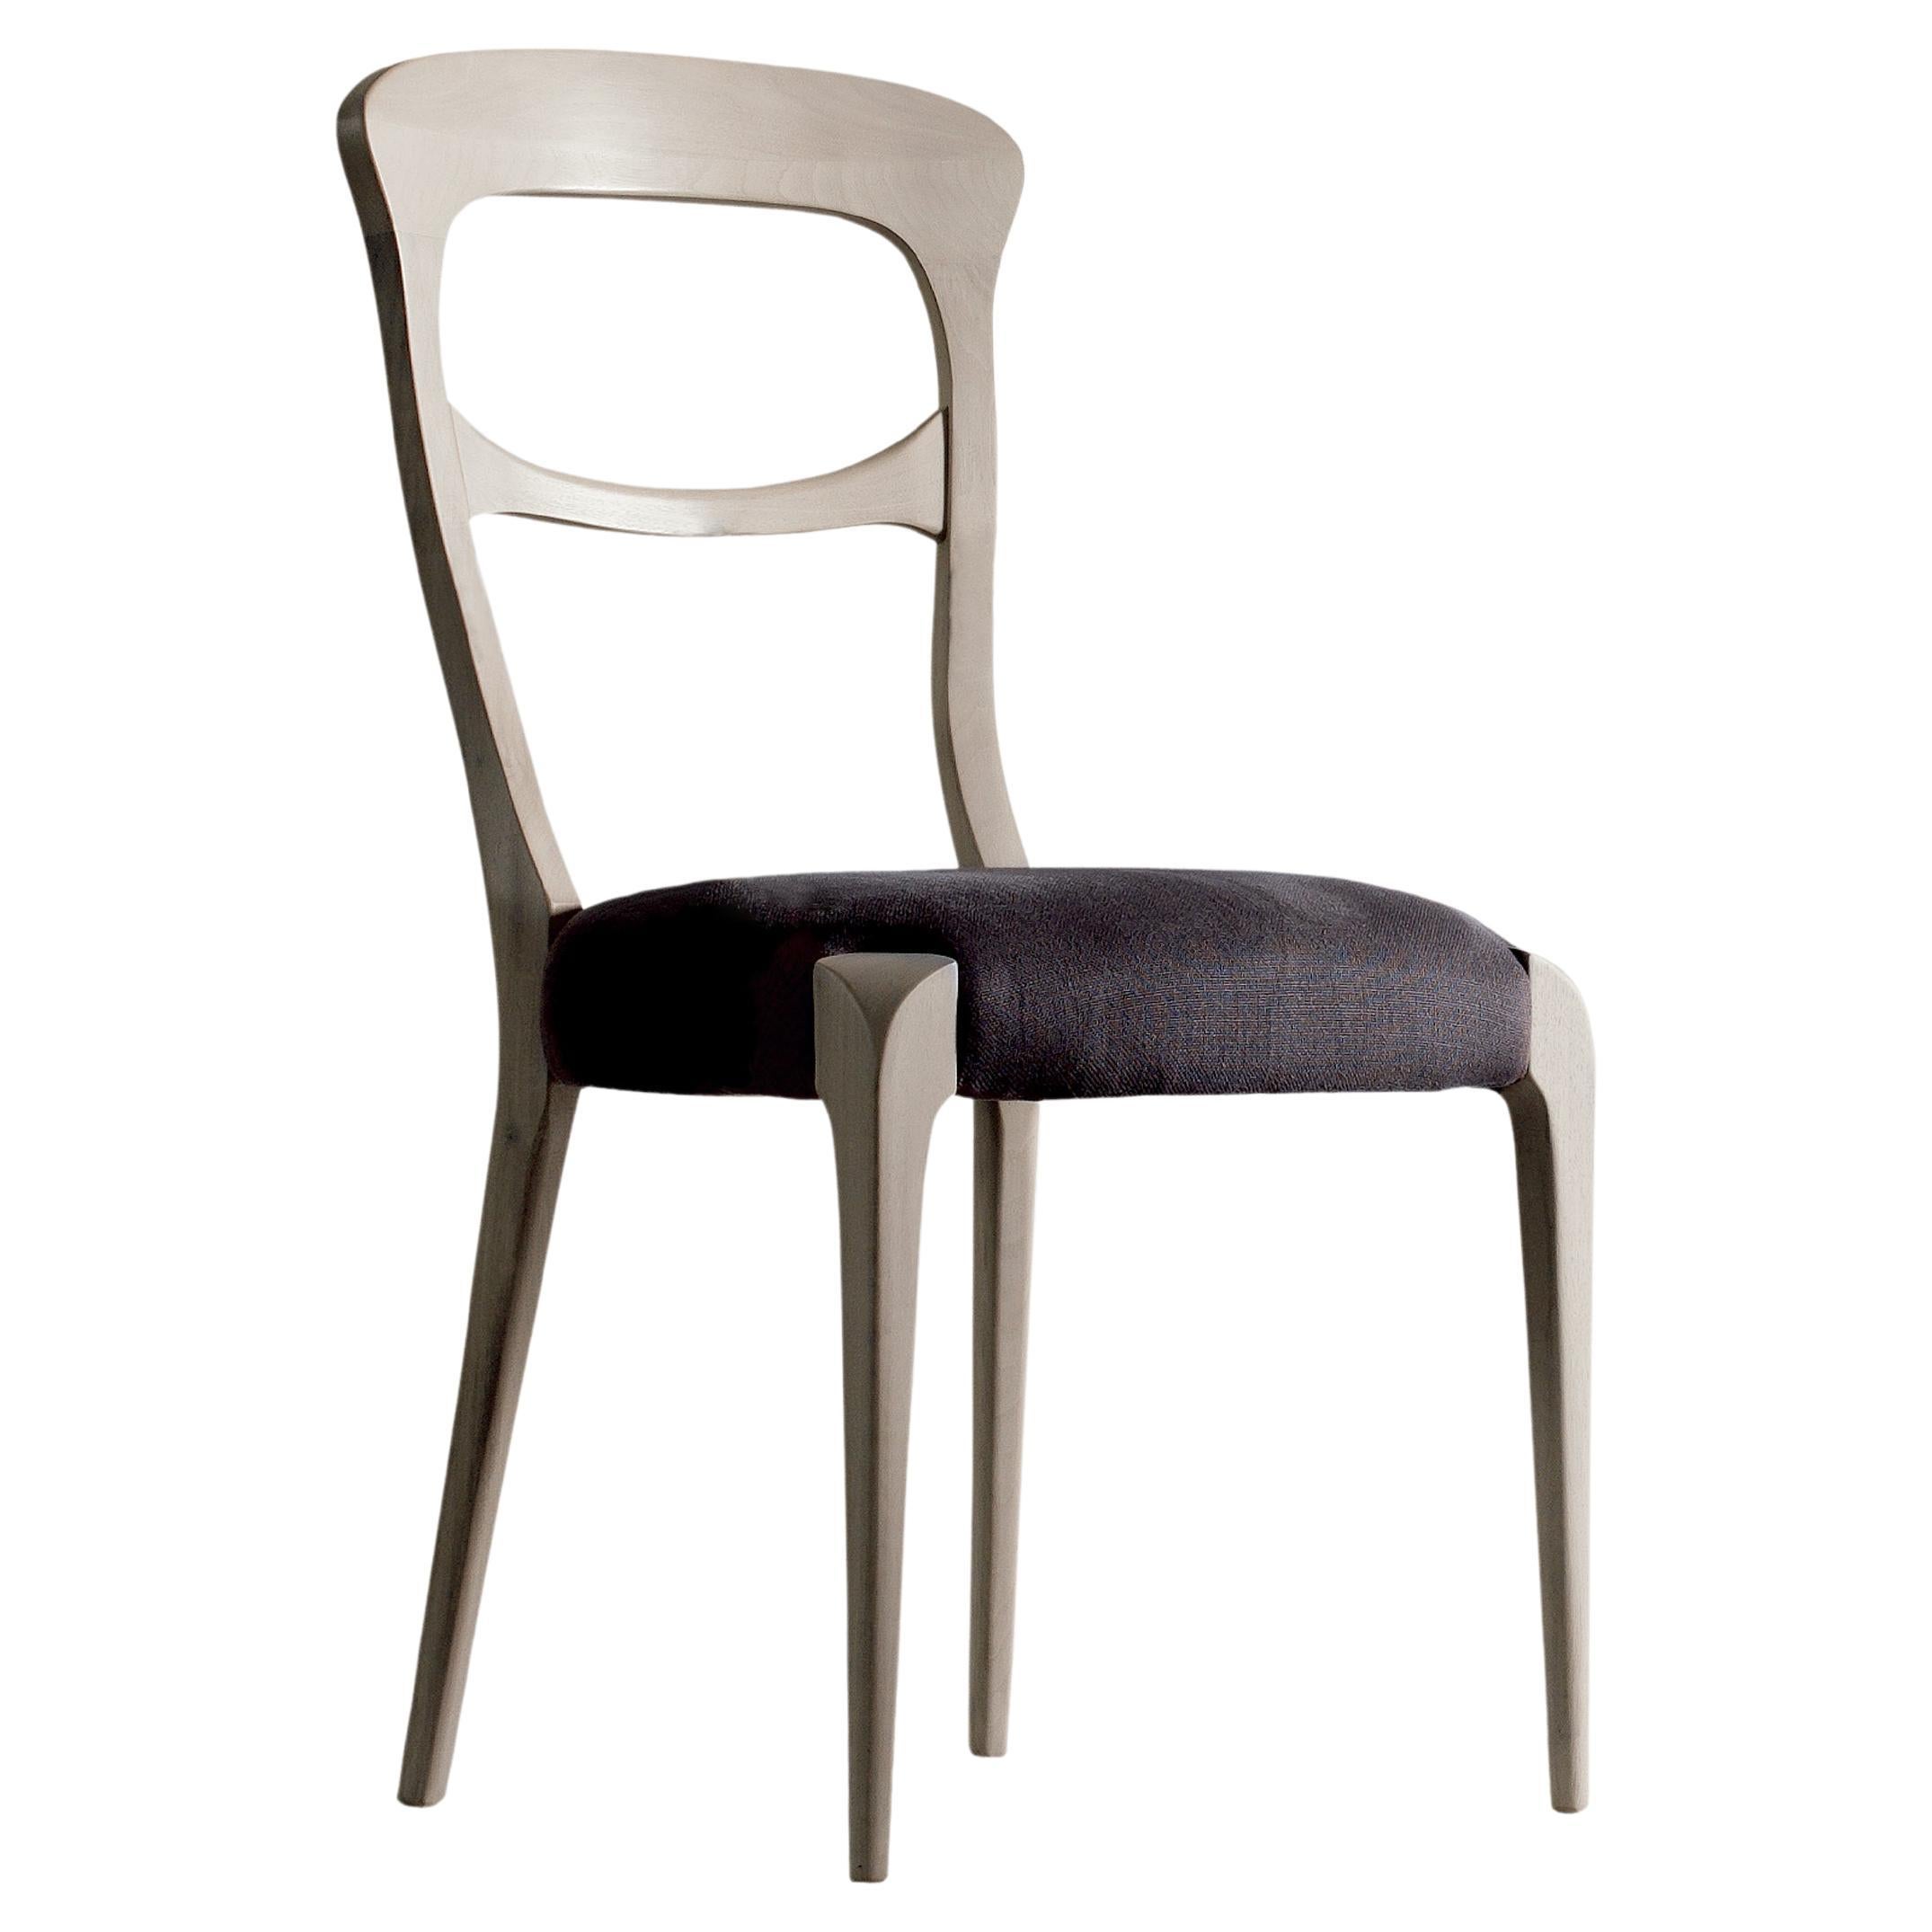 Capotavola Solid Wood Chair, Walnut in Natural Grey Finish, Contemporary